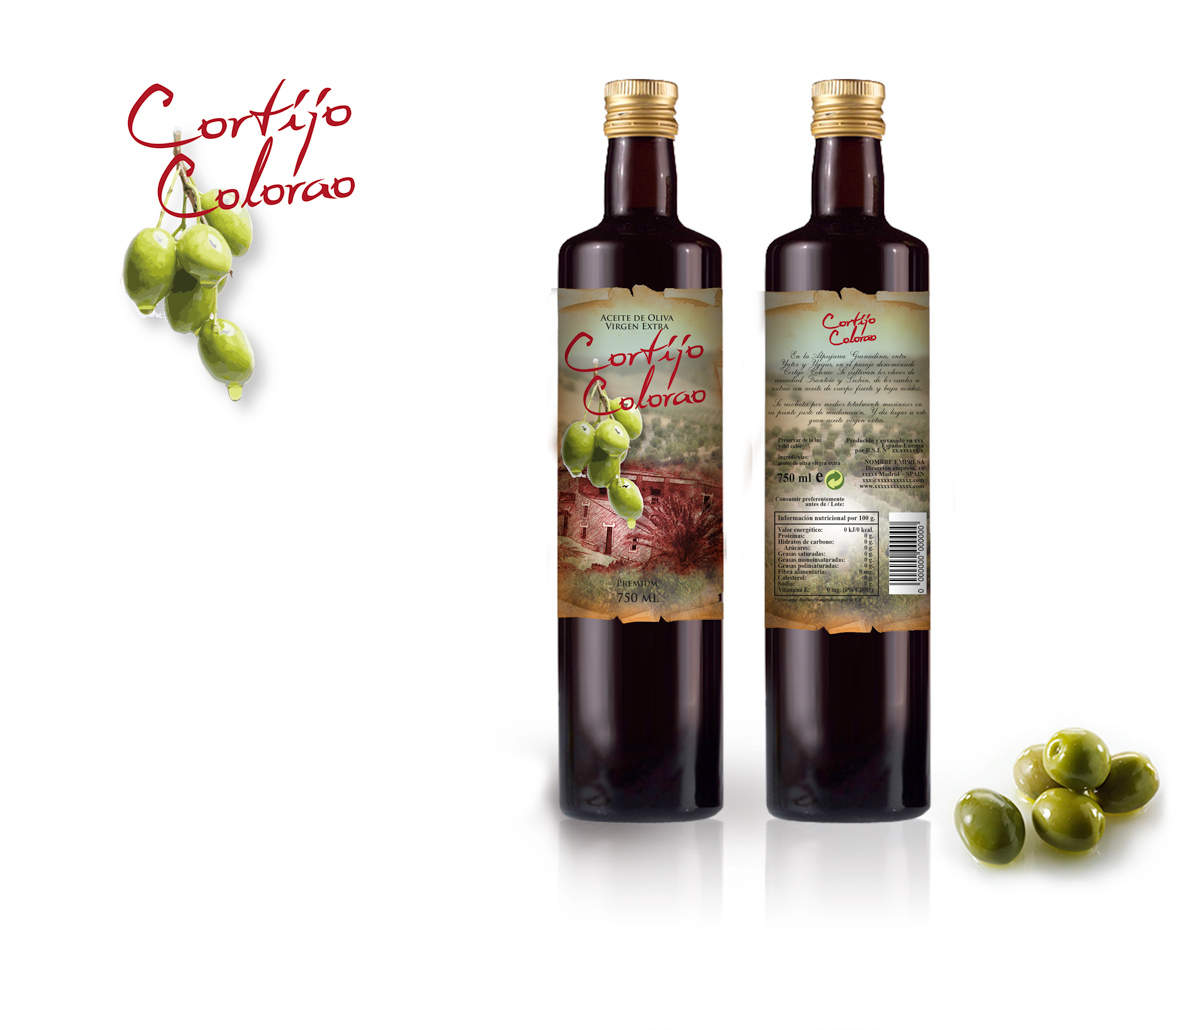 Portfolio of graphic and creative design works of extra virgin olive oil label design and packaging for CORTIJO COLORAO